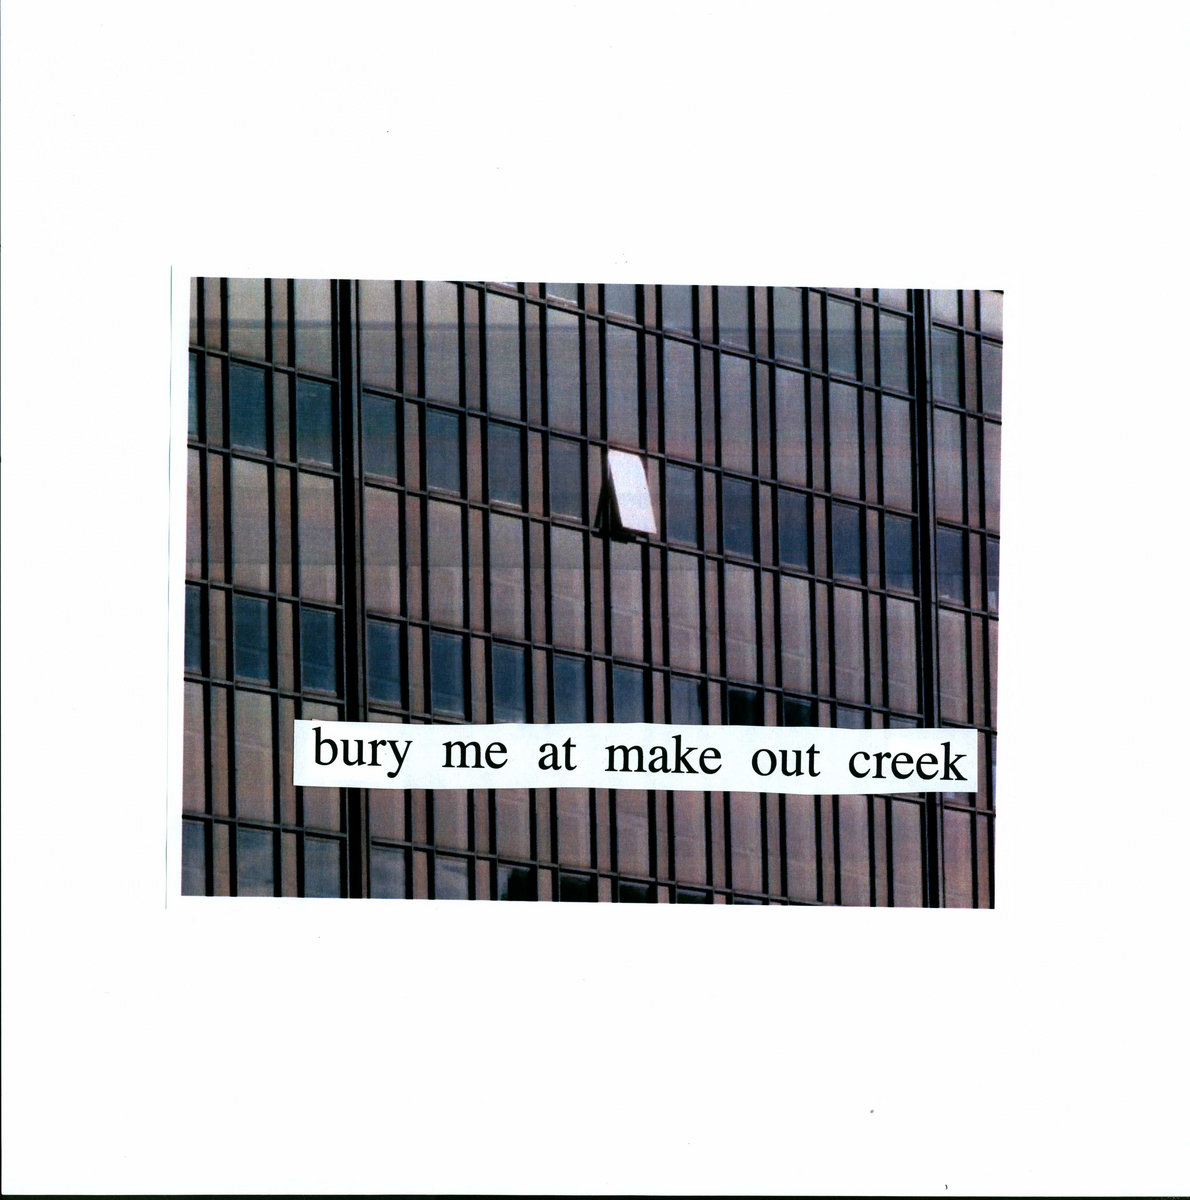 THE ALBUM COVER OF BURY ME AT MAKEOUT CREEK BY MITSKI.